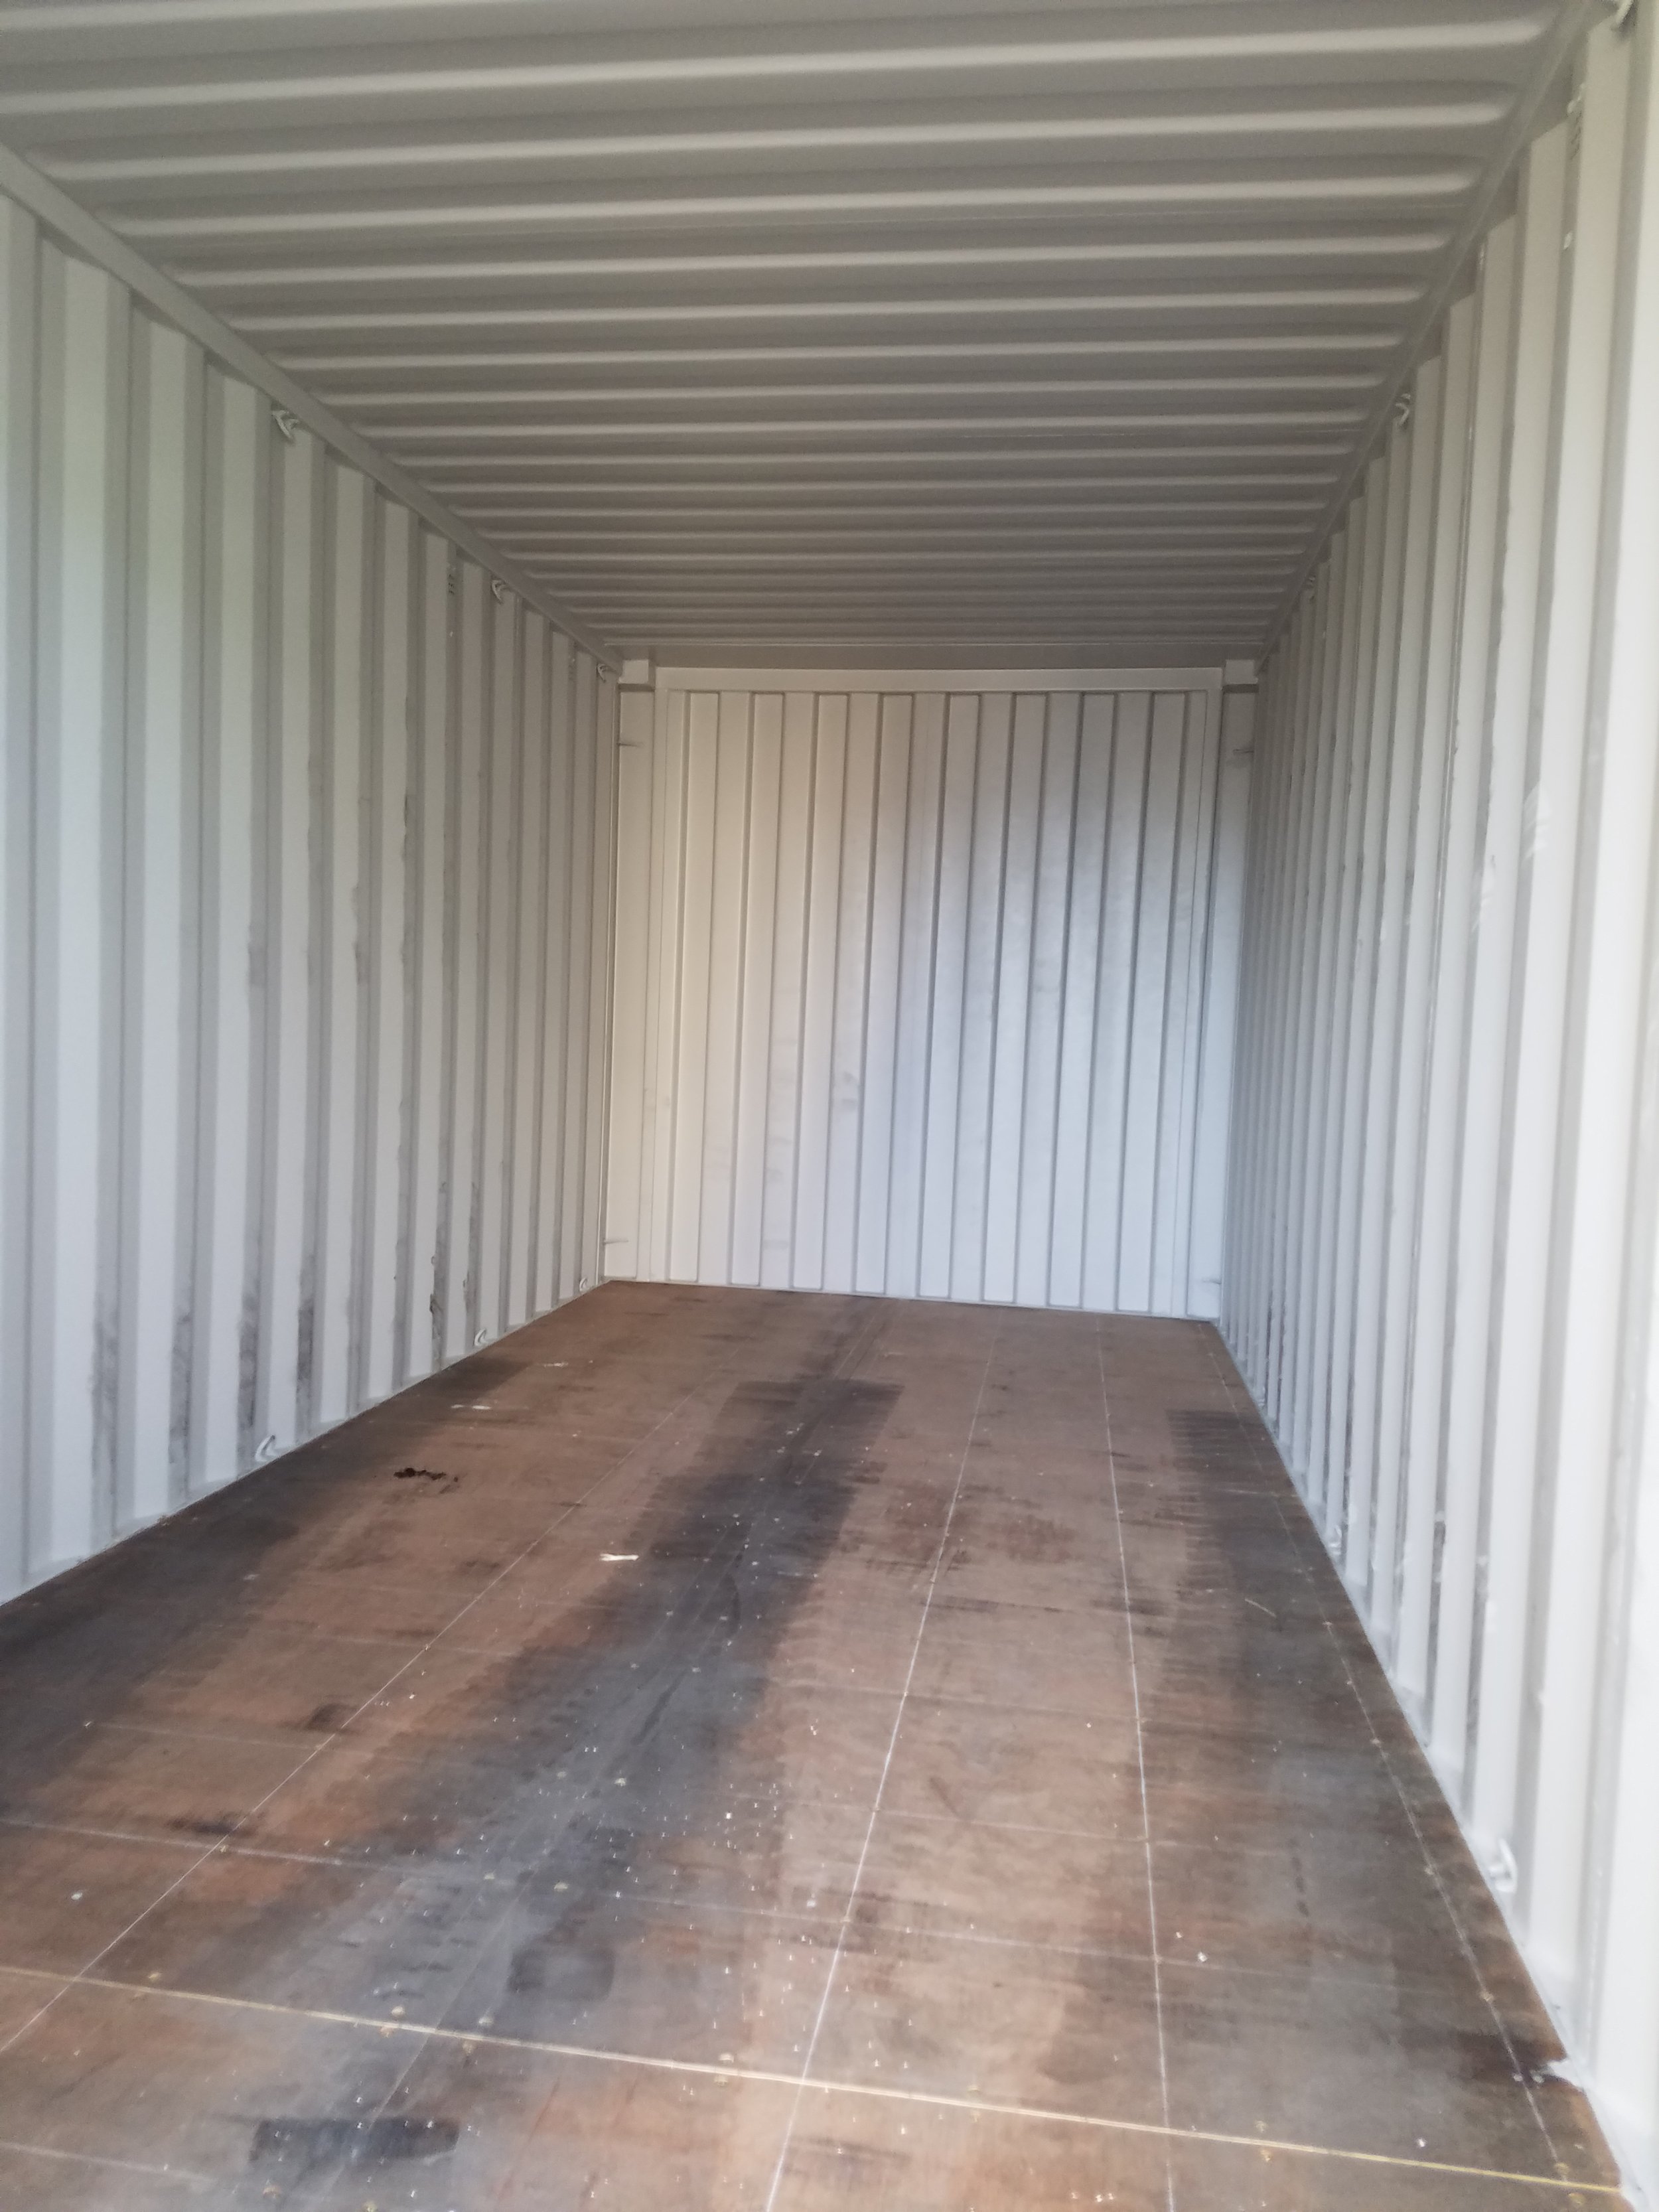 Clearer picture of interior of same spec containers, but in Minneapolis